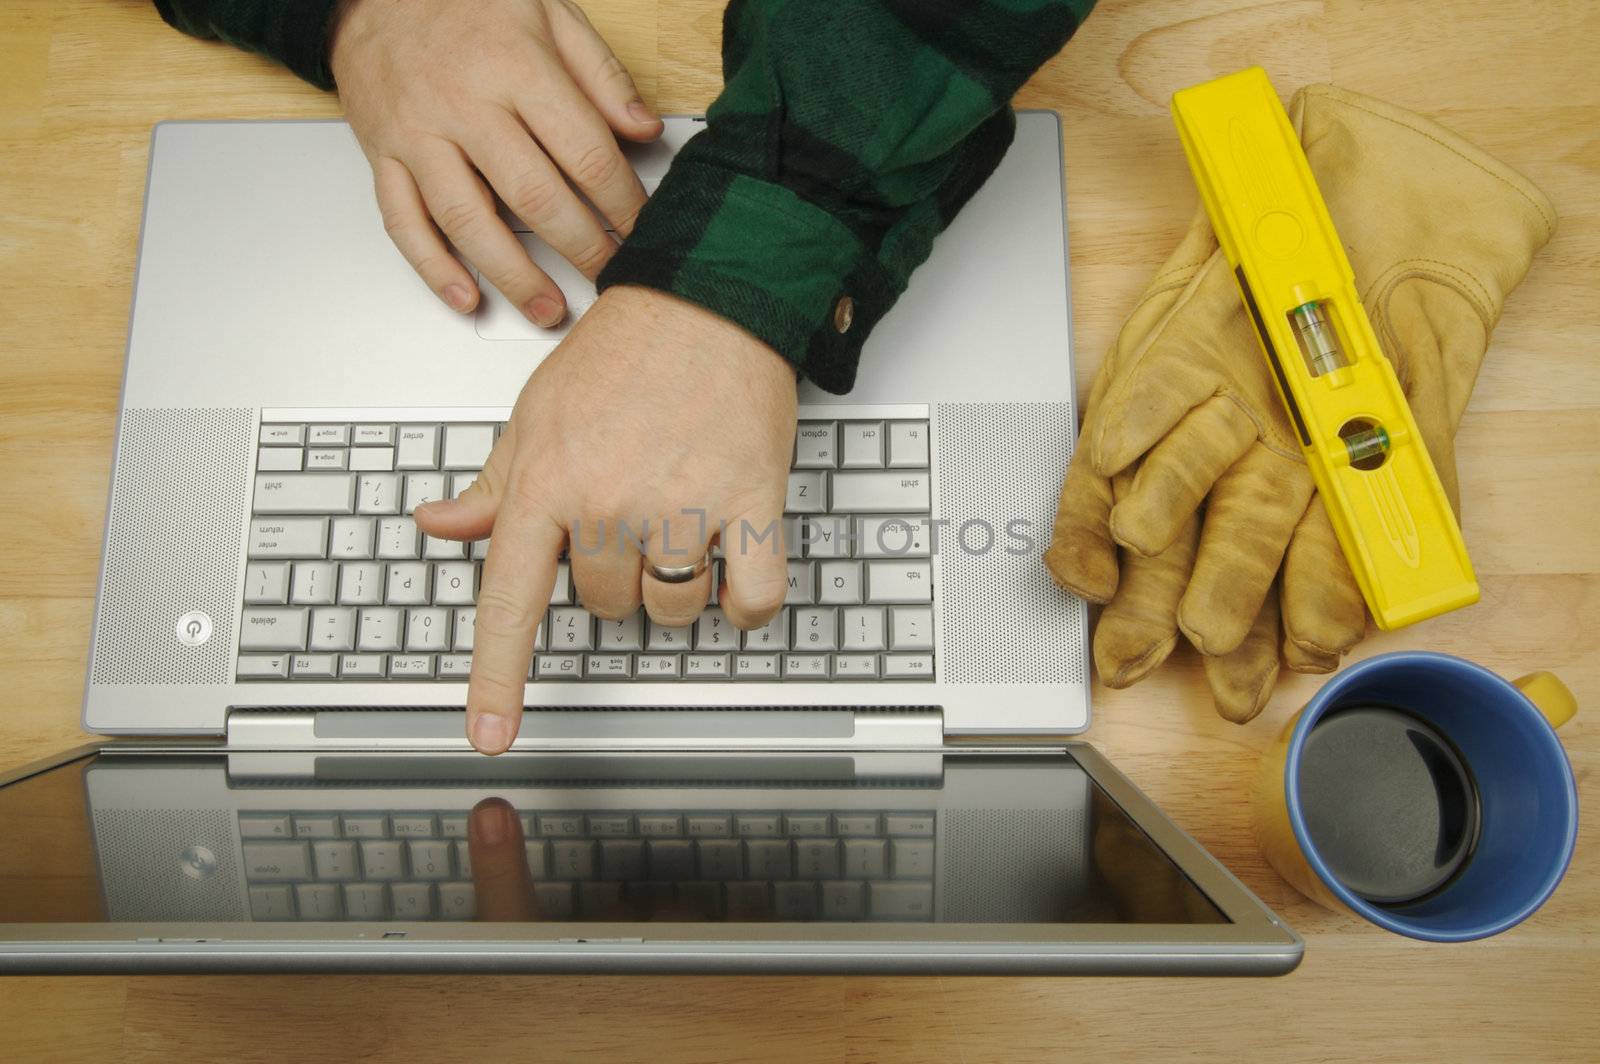 Contractor Points & Reviews Project on Laptop with level, gloves and coffee to his side. Great image for online information regarding home improvement, additions, remodeling or construction.